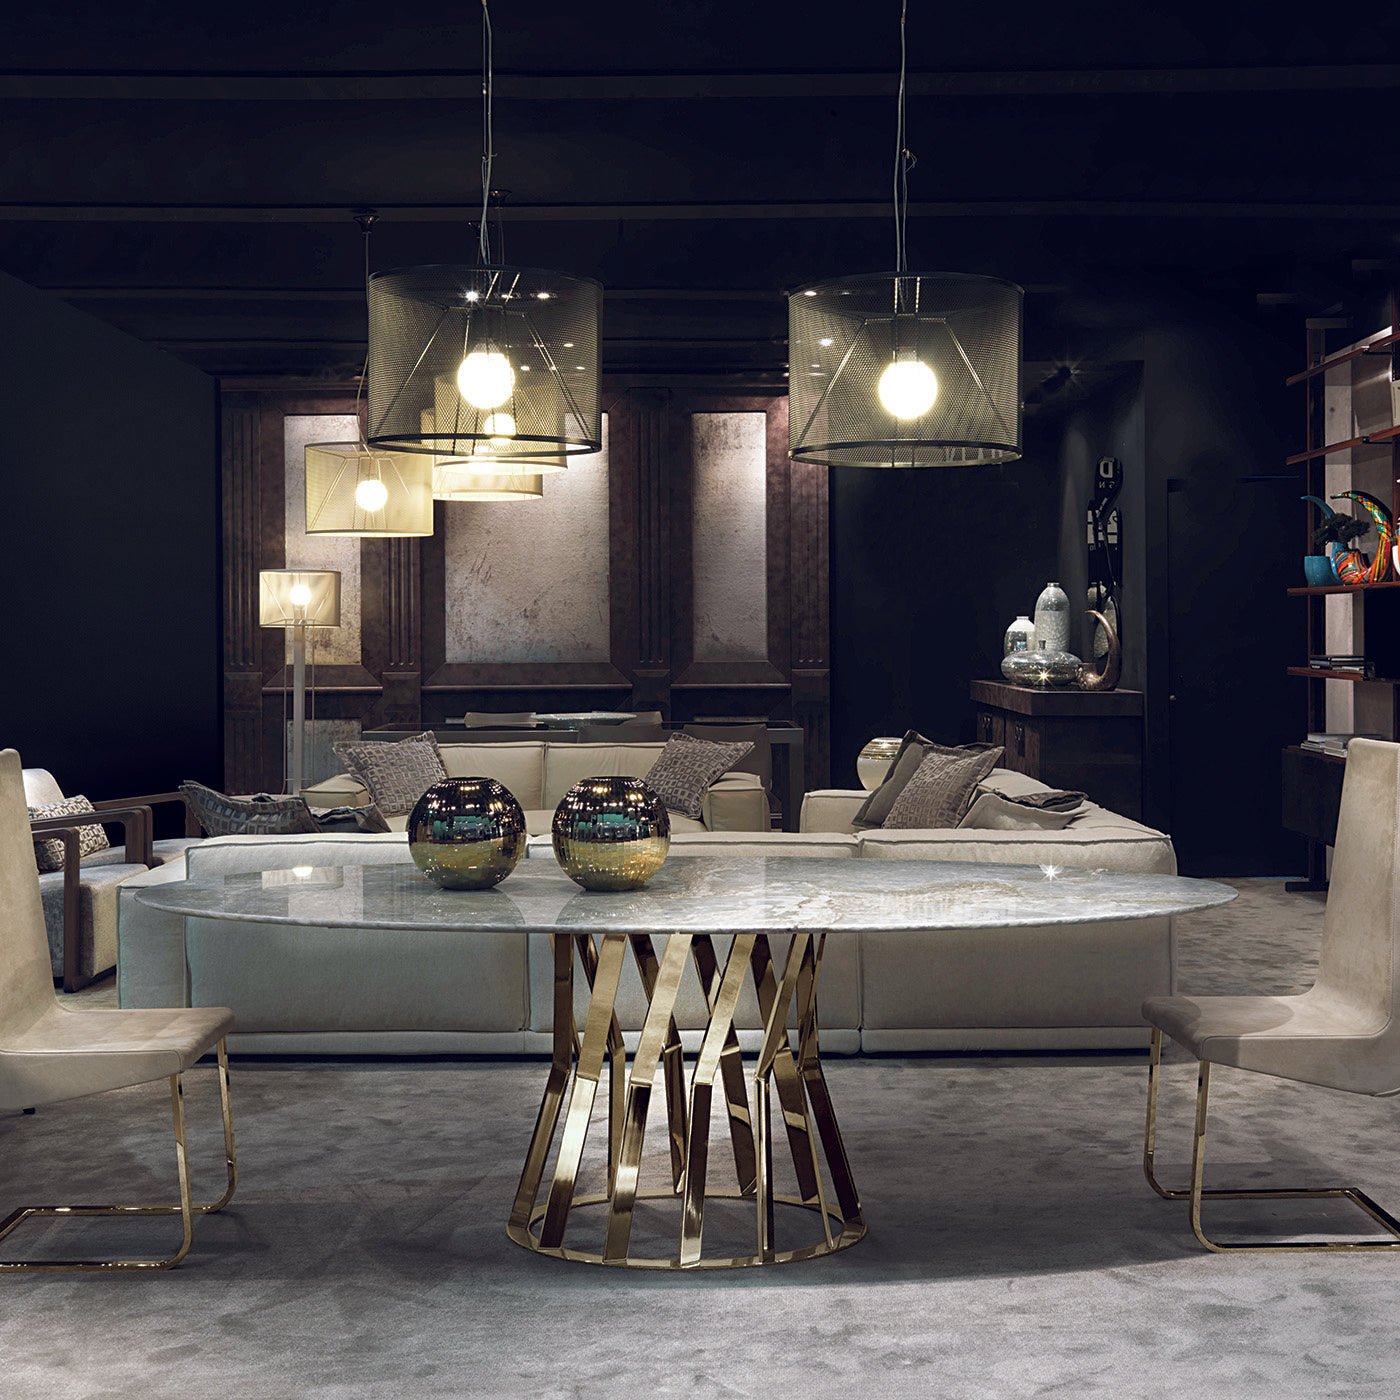 Ray Ed/20 353 Gold Dining Table By Stefano Bettio - Alternative view 1